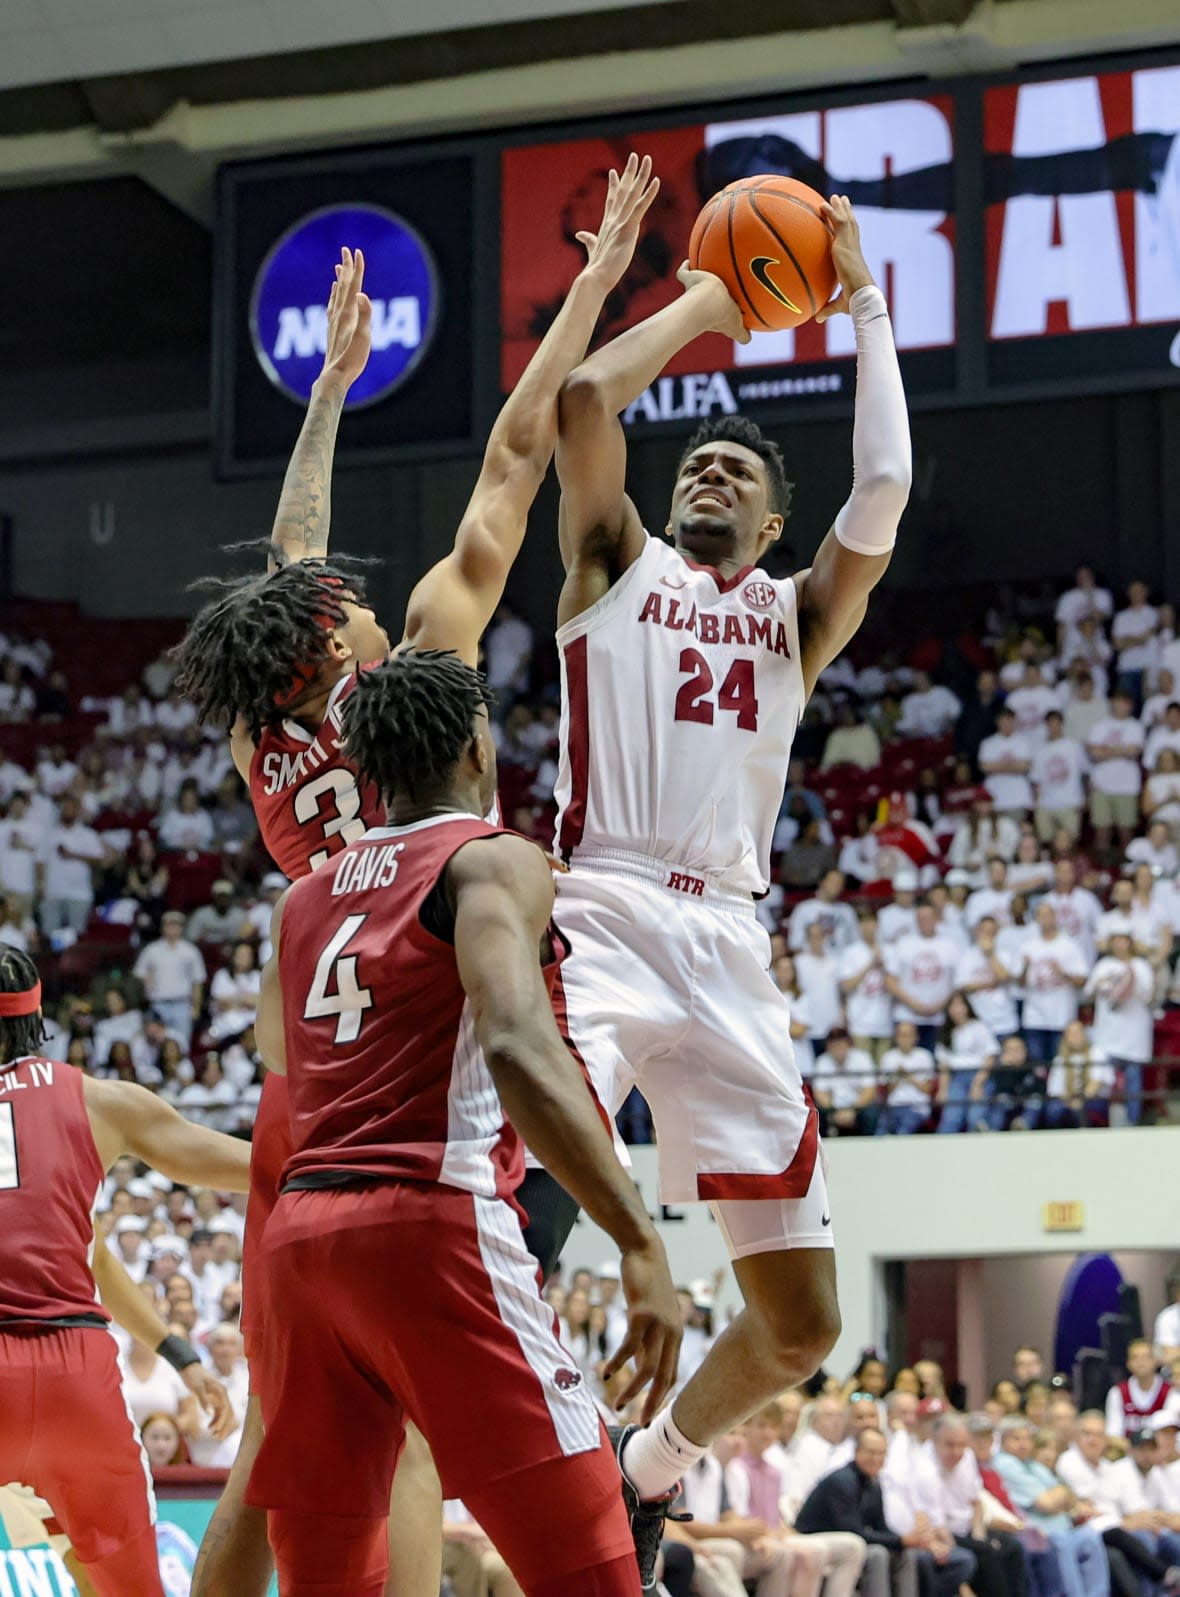 Brandon Miller #24 of the Alabama Crimson Tide shoots a second-half shot over Nick Smith Jr. #3 and Davonte Davis #4 of the Arkansas Razorbacks during the game at Coleman Coliseum on February 25, 2023 in Tuscaloosa, Alabama. (Photo by Brandon Sumrall/Getty Images)